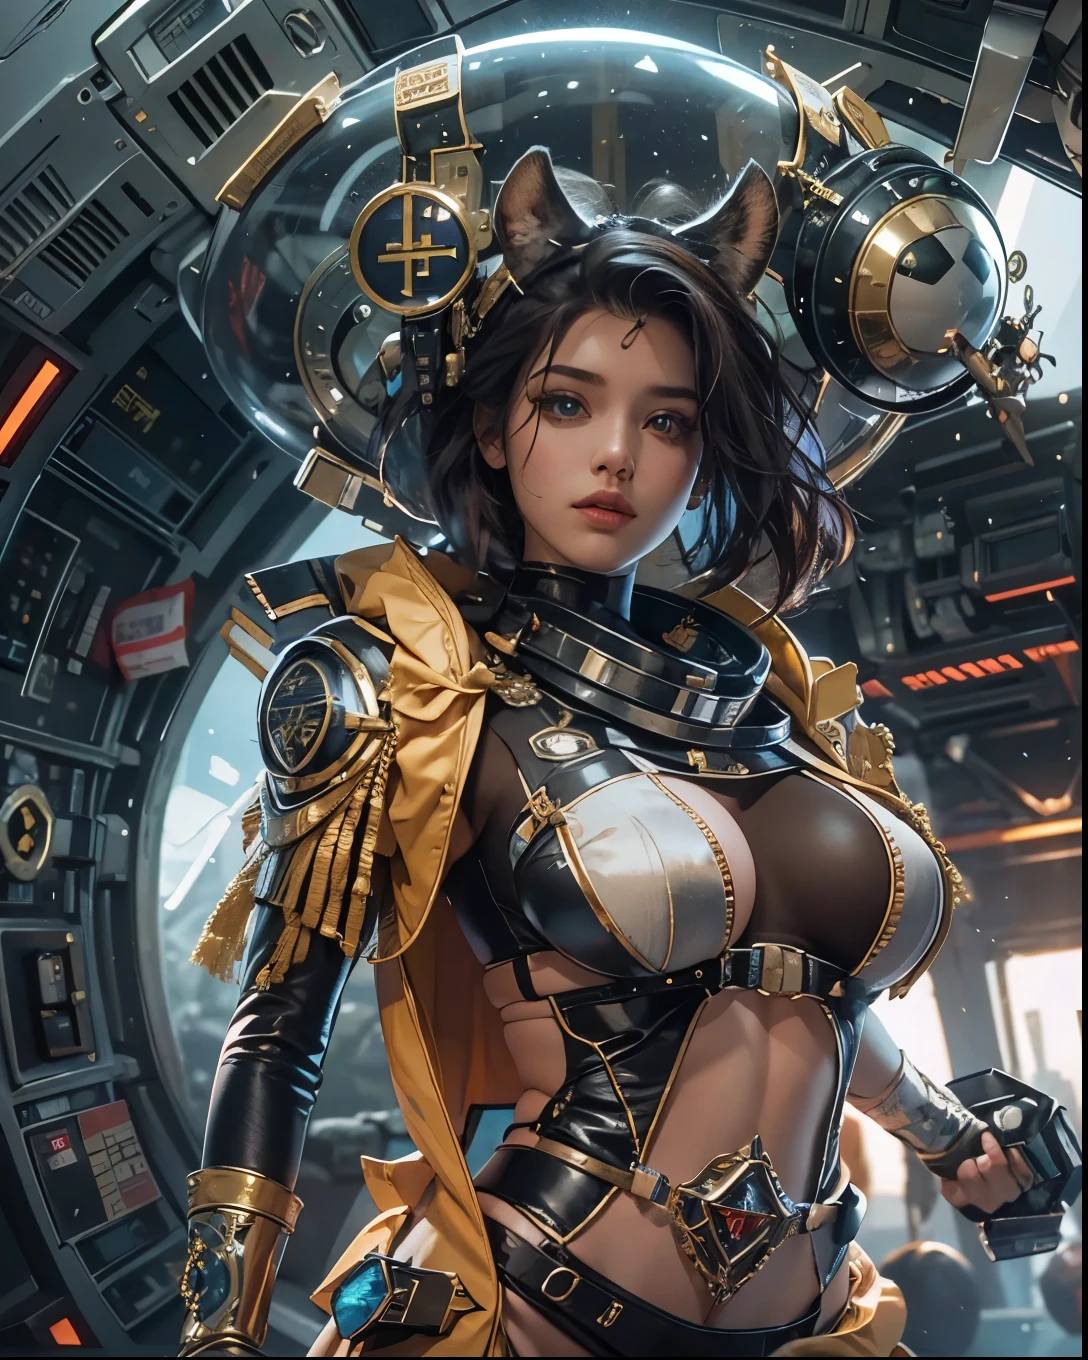 Masterpiece Galaxy female sexual lovely fullbody The_Manned_Maneuvering_Unit (MMU) outfits astronaut girl, propulsion jet-pack missile shot outdoor UNITED STATES Flag Goddess Conceptual contre-jours onyx Star Sun space Station Port War Will-o'-the-wisp Deep Ship, Pilots "Heavy metal" Devastating cyberpunk mature "Luis Royo" dazzling Admiral Marshall richly decorated star Cosplay Royale native "Celia Rose" women "Celia Rose Gooding" cow-girl "Nyota Uhura" sundrop ultra_Sharpness intricate ultra pro-photorealists optimal ultra high_quality perfection Accuracy reflexes ultra highRes detailed max volumetric graduate netteté improved Octane_render number_rendues UHD XT3 K 32K 16K 8K DSLR HDR unrealengine5 saturate shadow analogique 3dcg symmetrical sexy body athletic, epic face cheekbones effects embarrassed redderer eyeliner indigo beautiful eyes sapphires dark pupils black brown retina lazulis iris turquoises mouth open teeth obvious smiles fringes ecstatic floating jacket quirky fixed eccentric cape levitating shoulders-off shirt lace clavicles white papillotes embroidered breasts points satin corsait sundrop thick felther felt skirt matching spinels loose swinging navel waist revealing belts-Chastity heart diamond padlock Gold decorated silver agate pubis reveal scarlet pubis-hairy silks garters snaps thighs legs boots stainless steel gothic thick onyx, magic ruby invokes Bees incandescent CGSCOSITY flowering invoke Bees monster equirectangular background 360 Crystalline hearth Queen_Bee Micro Recorder flash (EOS R6 135mm 1/1250s f/2.8 ISO400) Phaser shoot Mechanic Canon-ion opale, mannequins dramatic glass straight armor heavy chrome flat sensor Luminescence rune lava bands antenna engravings Tourmaline glyph plasma fathoms brass chef-d&#39 Michelangelo armoirie earth navy tattoo "Bruce Weber" sex girls naked nsfw varied multi etc.